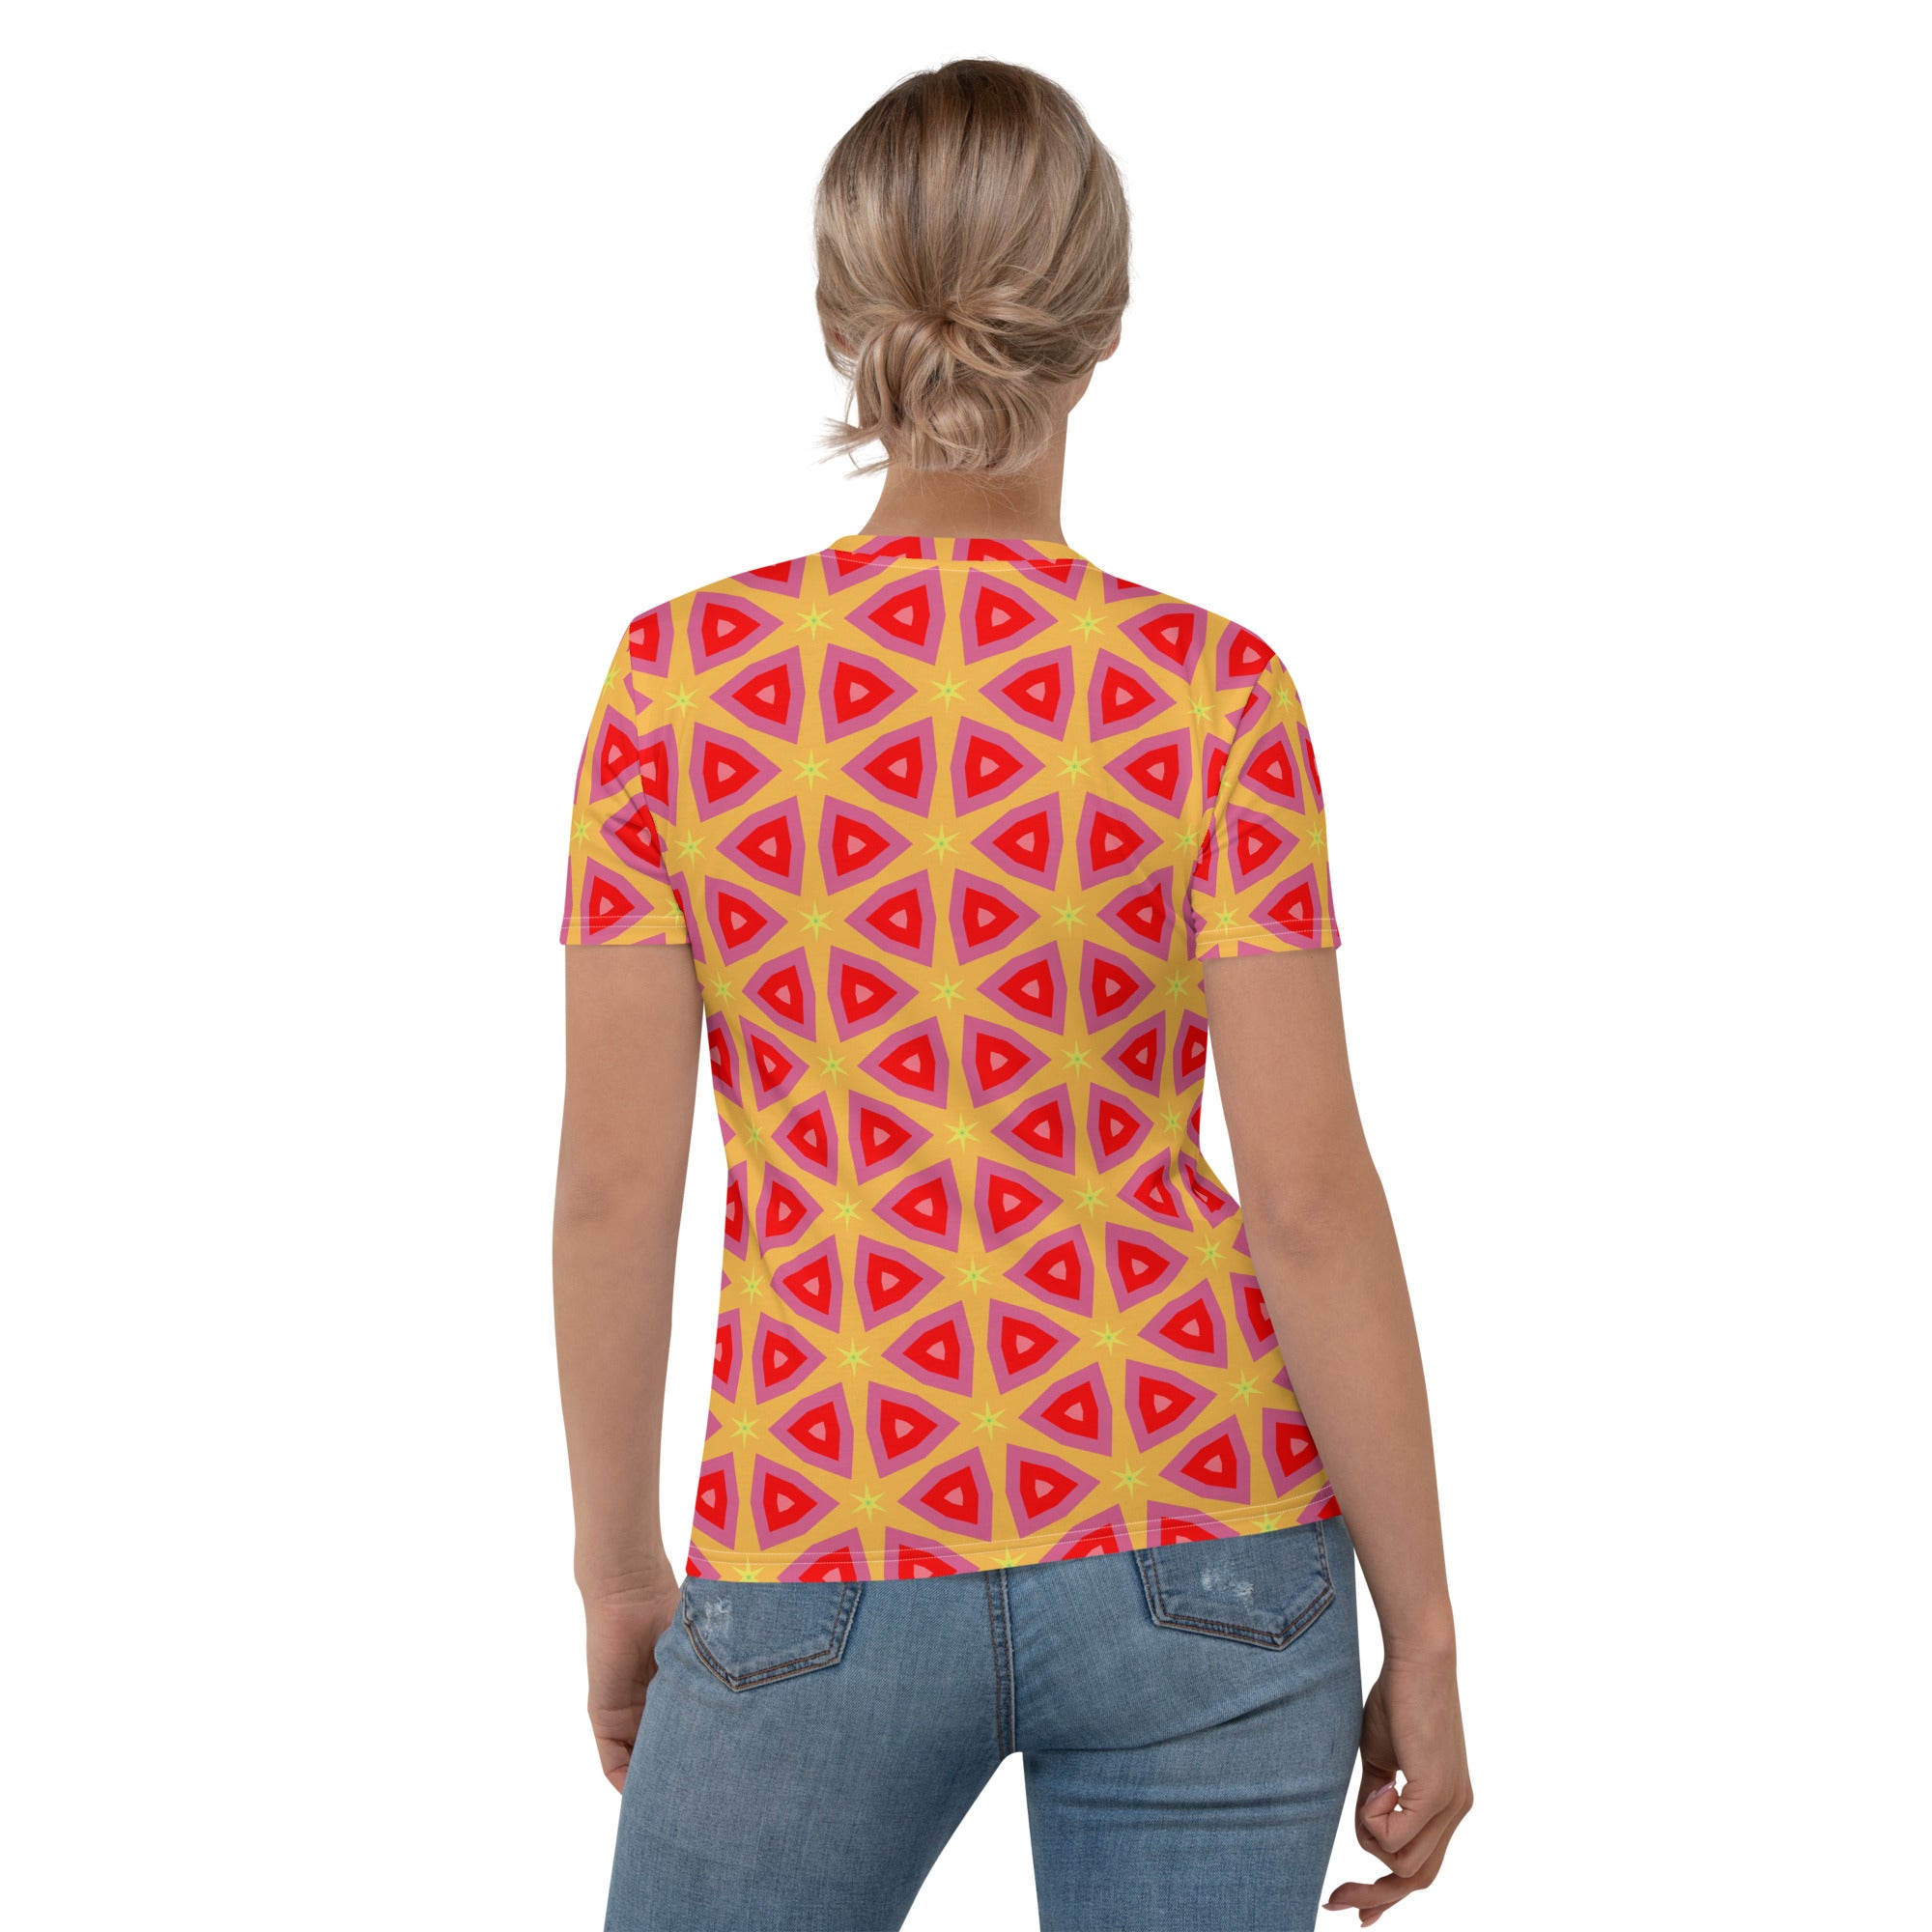 Vibrant patterned crewneck tee for women